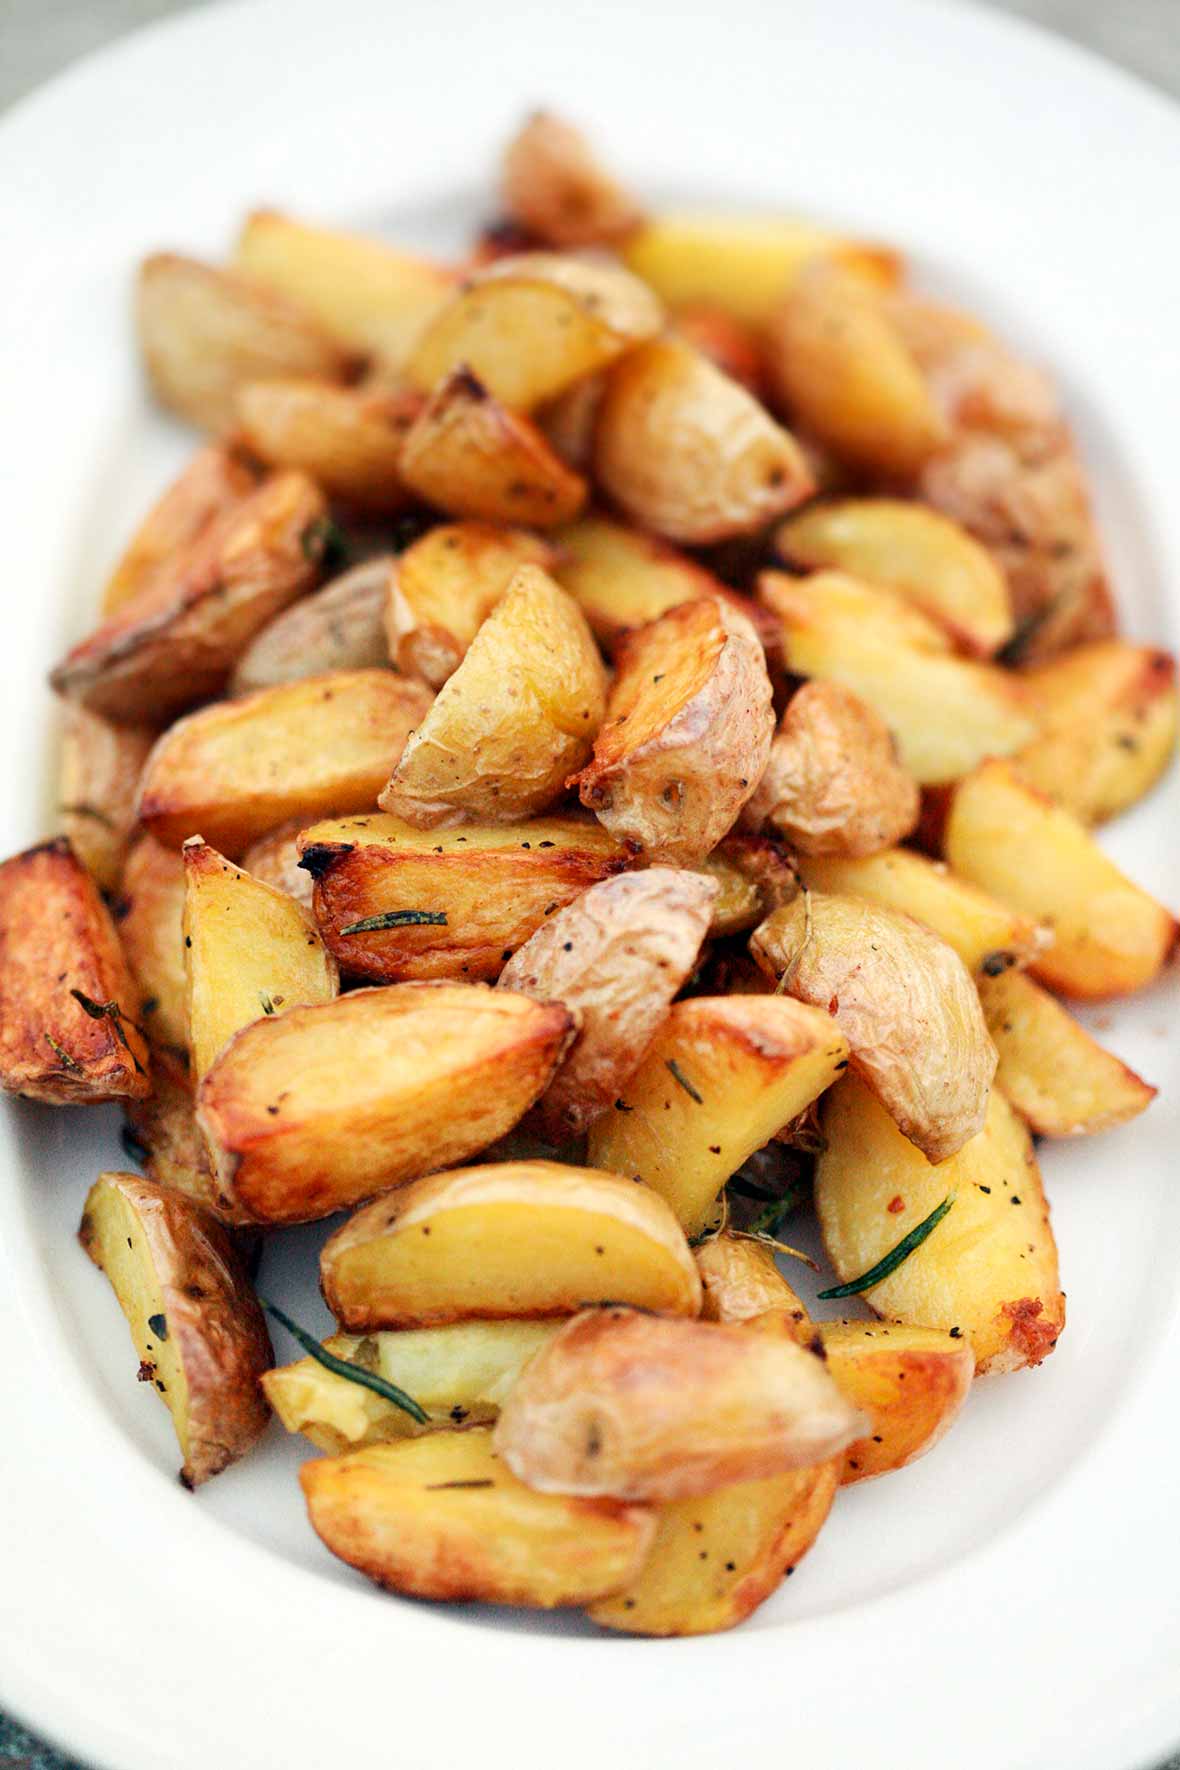 Roasted potatoes on the grill